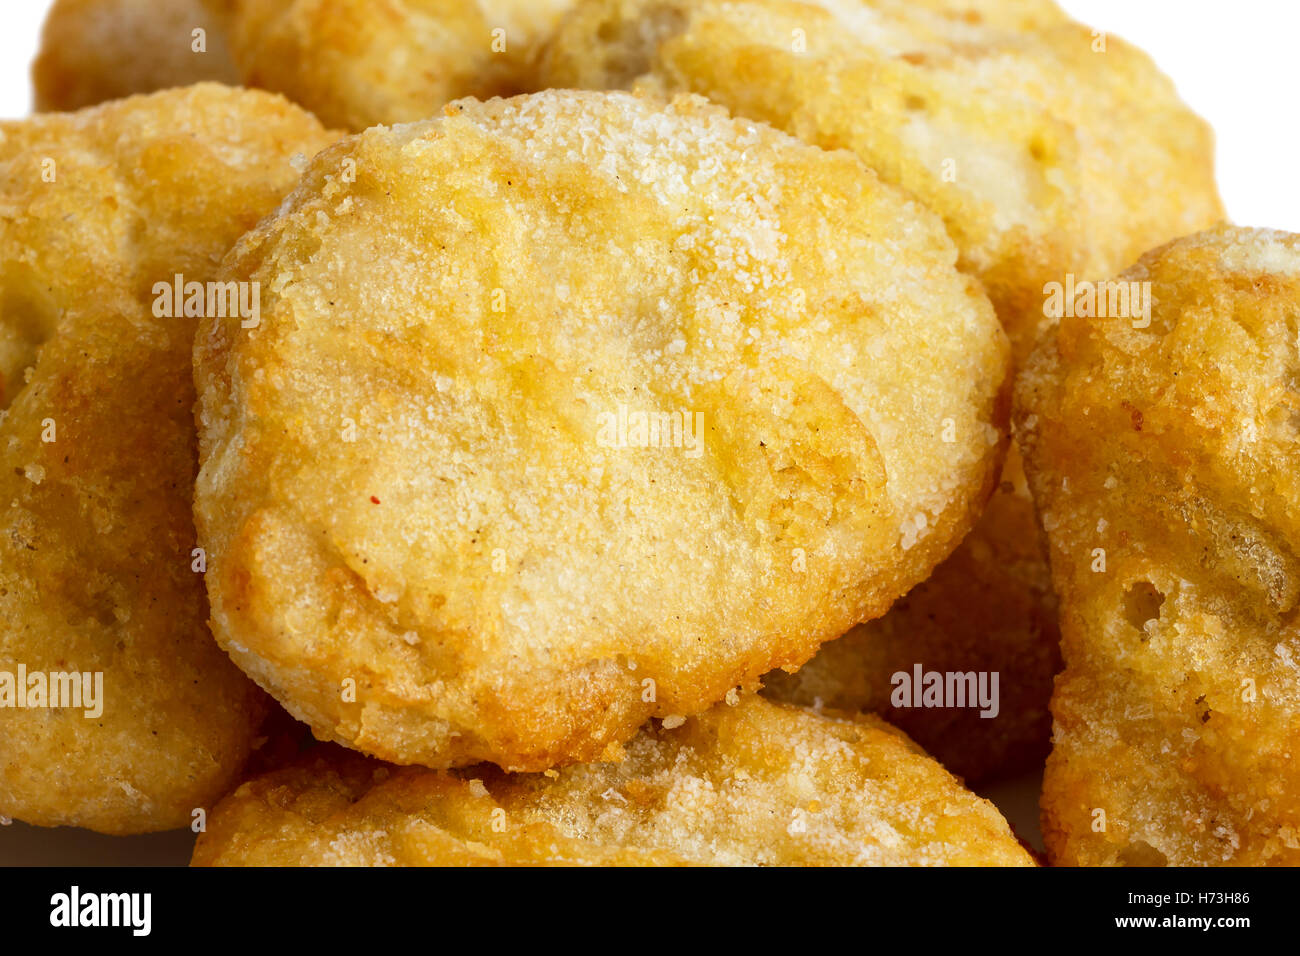 Detail of frozen battered chicken nuggets uncooked. Stock Photo